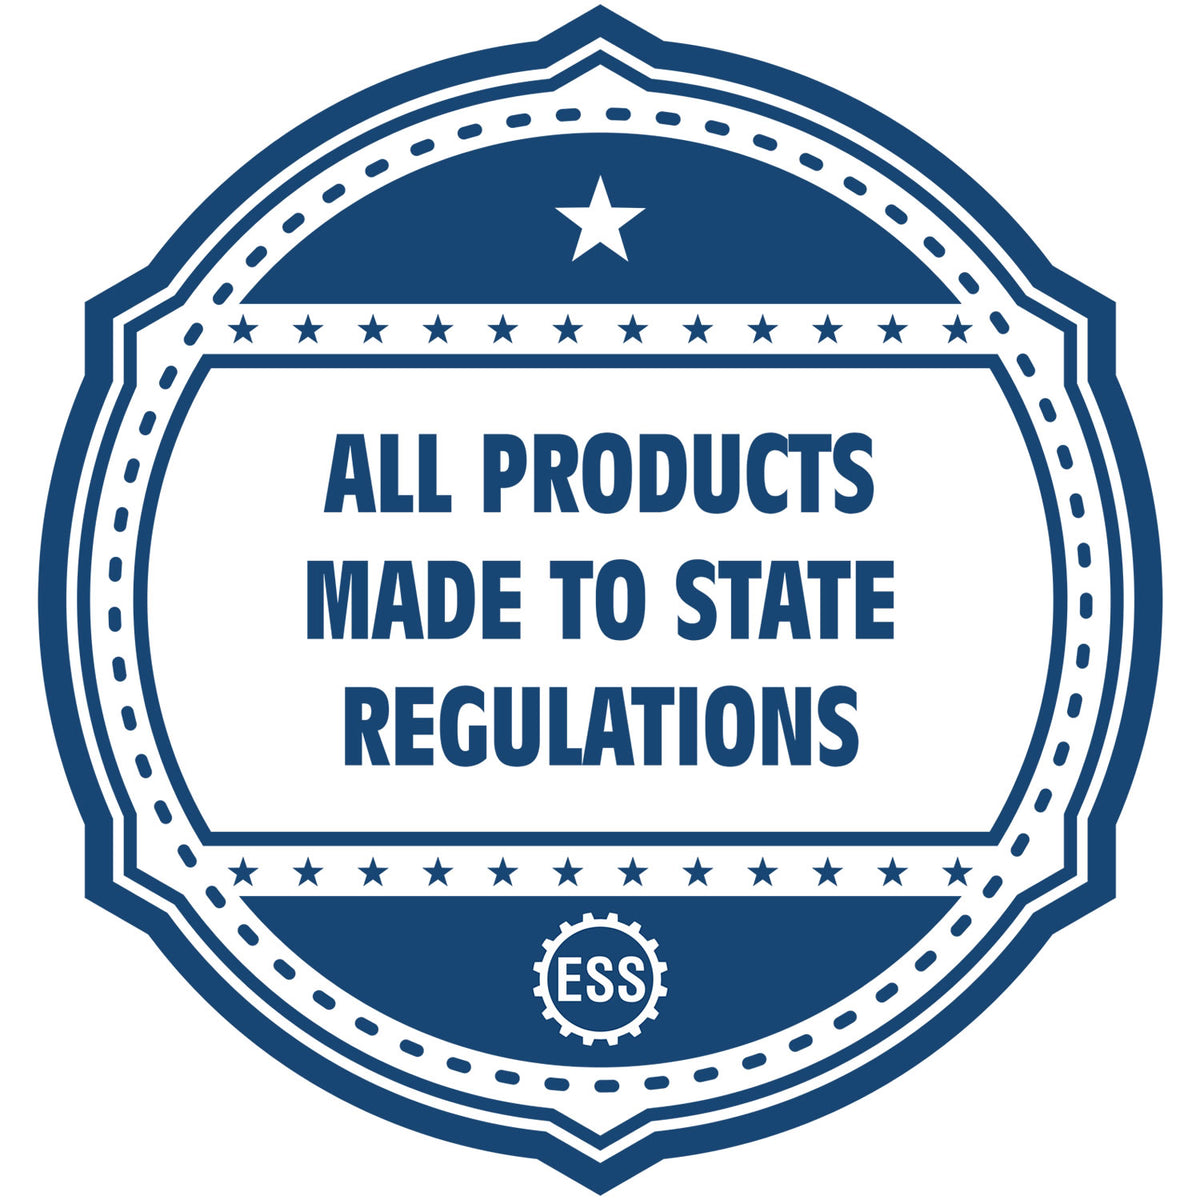 An icon or badge element for the Long Reach Wyoming PE Seal showing that this product is made in compliance with state regulations.